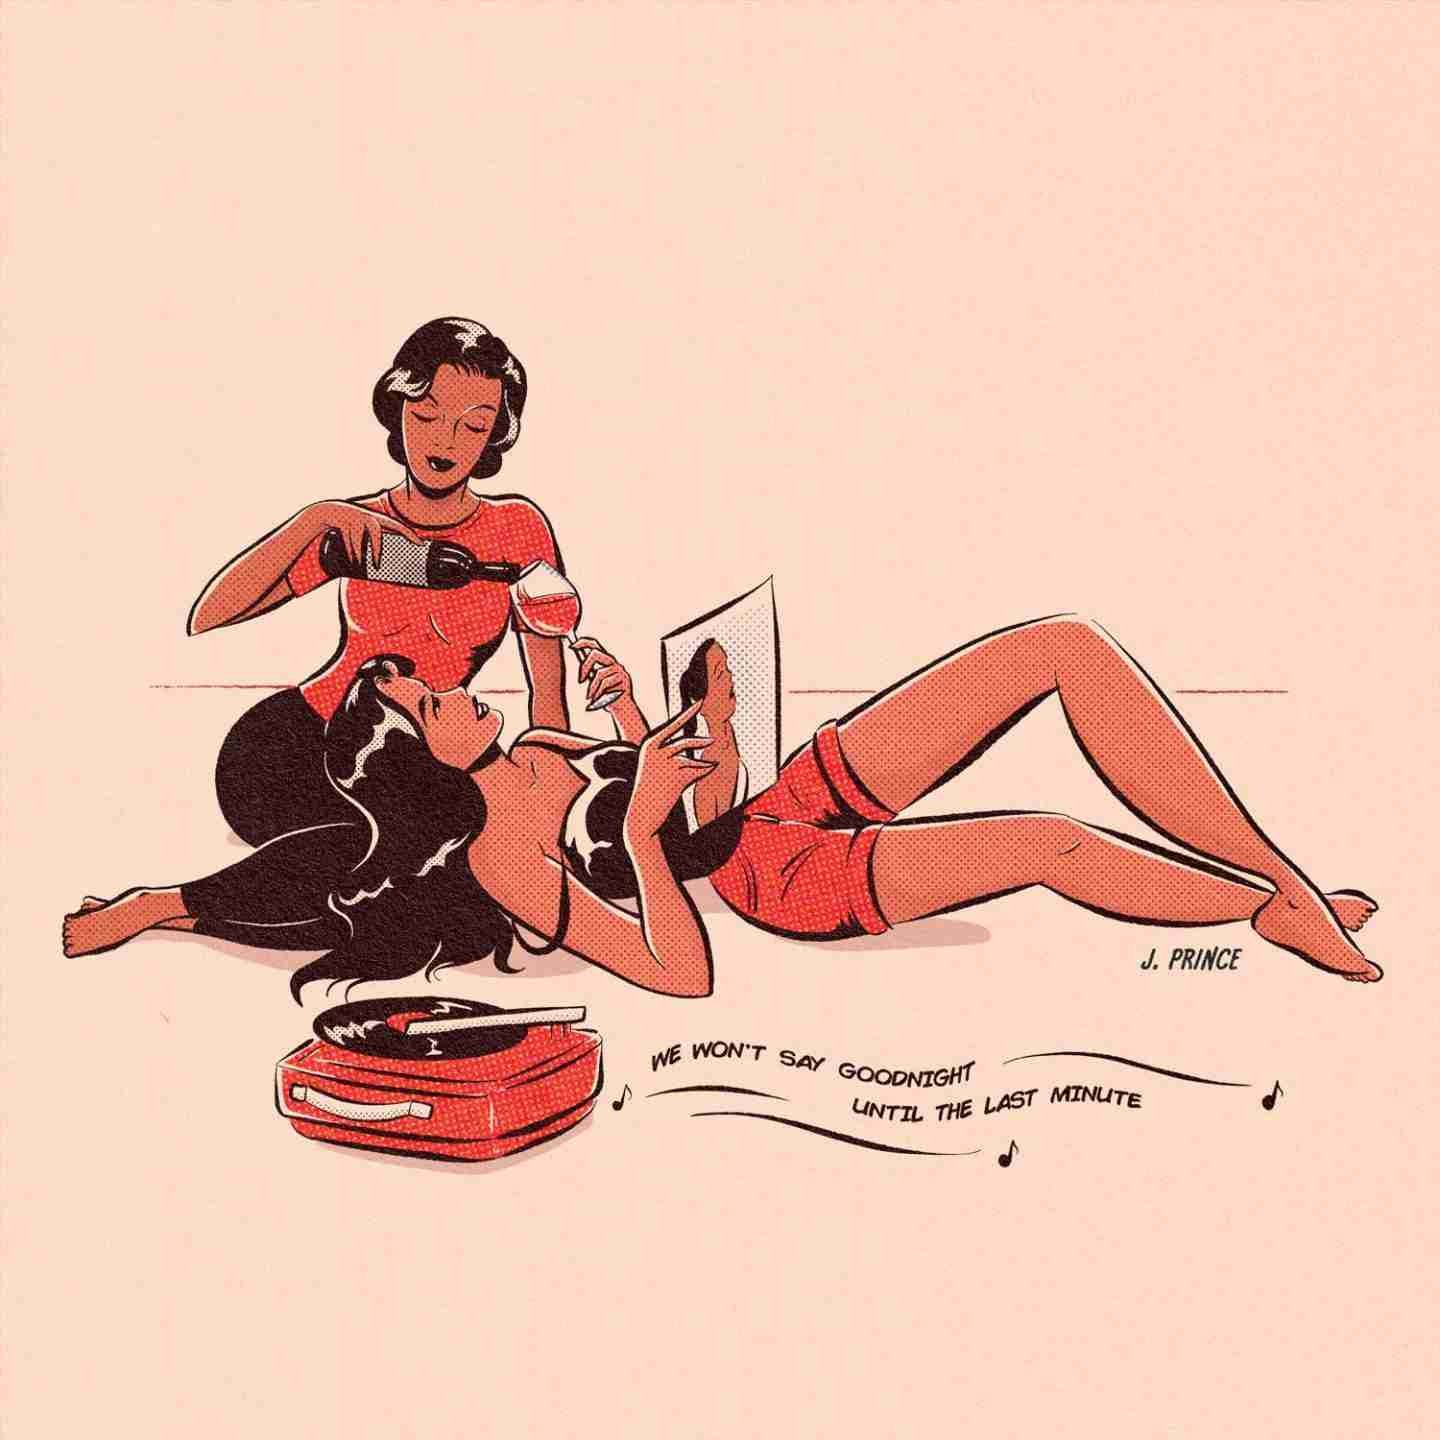 Ilustration by Jenifer Prince with two lesbian girls drinking wine and listening to a record